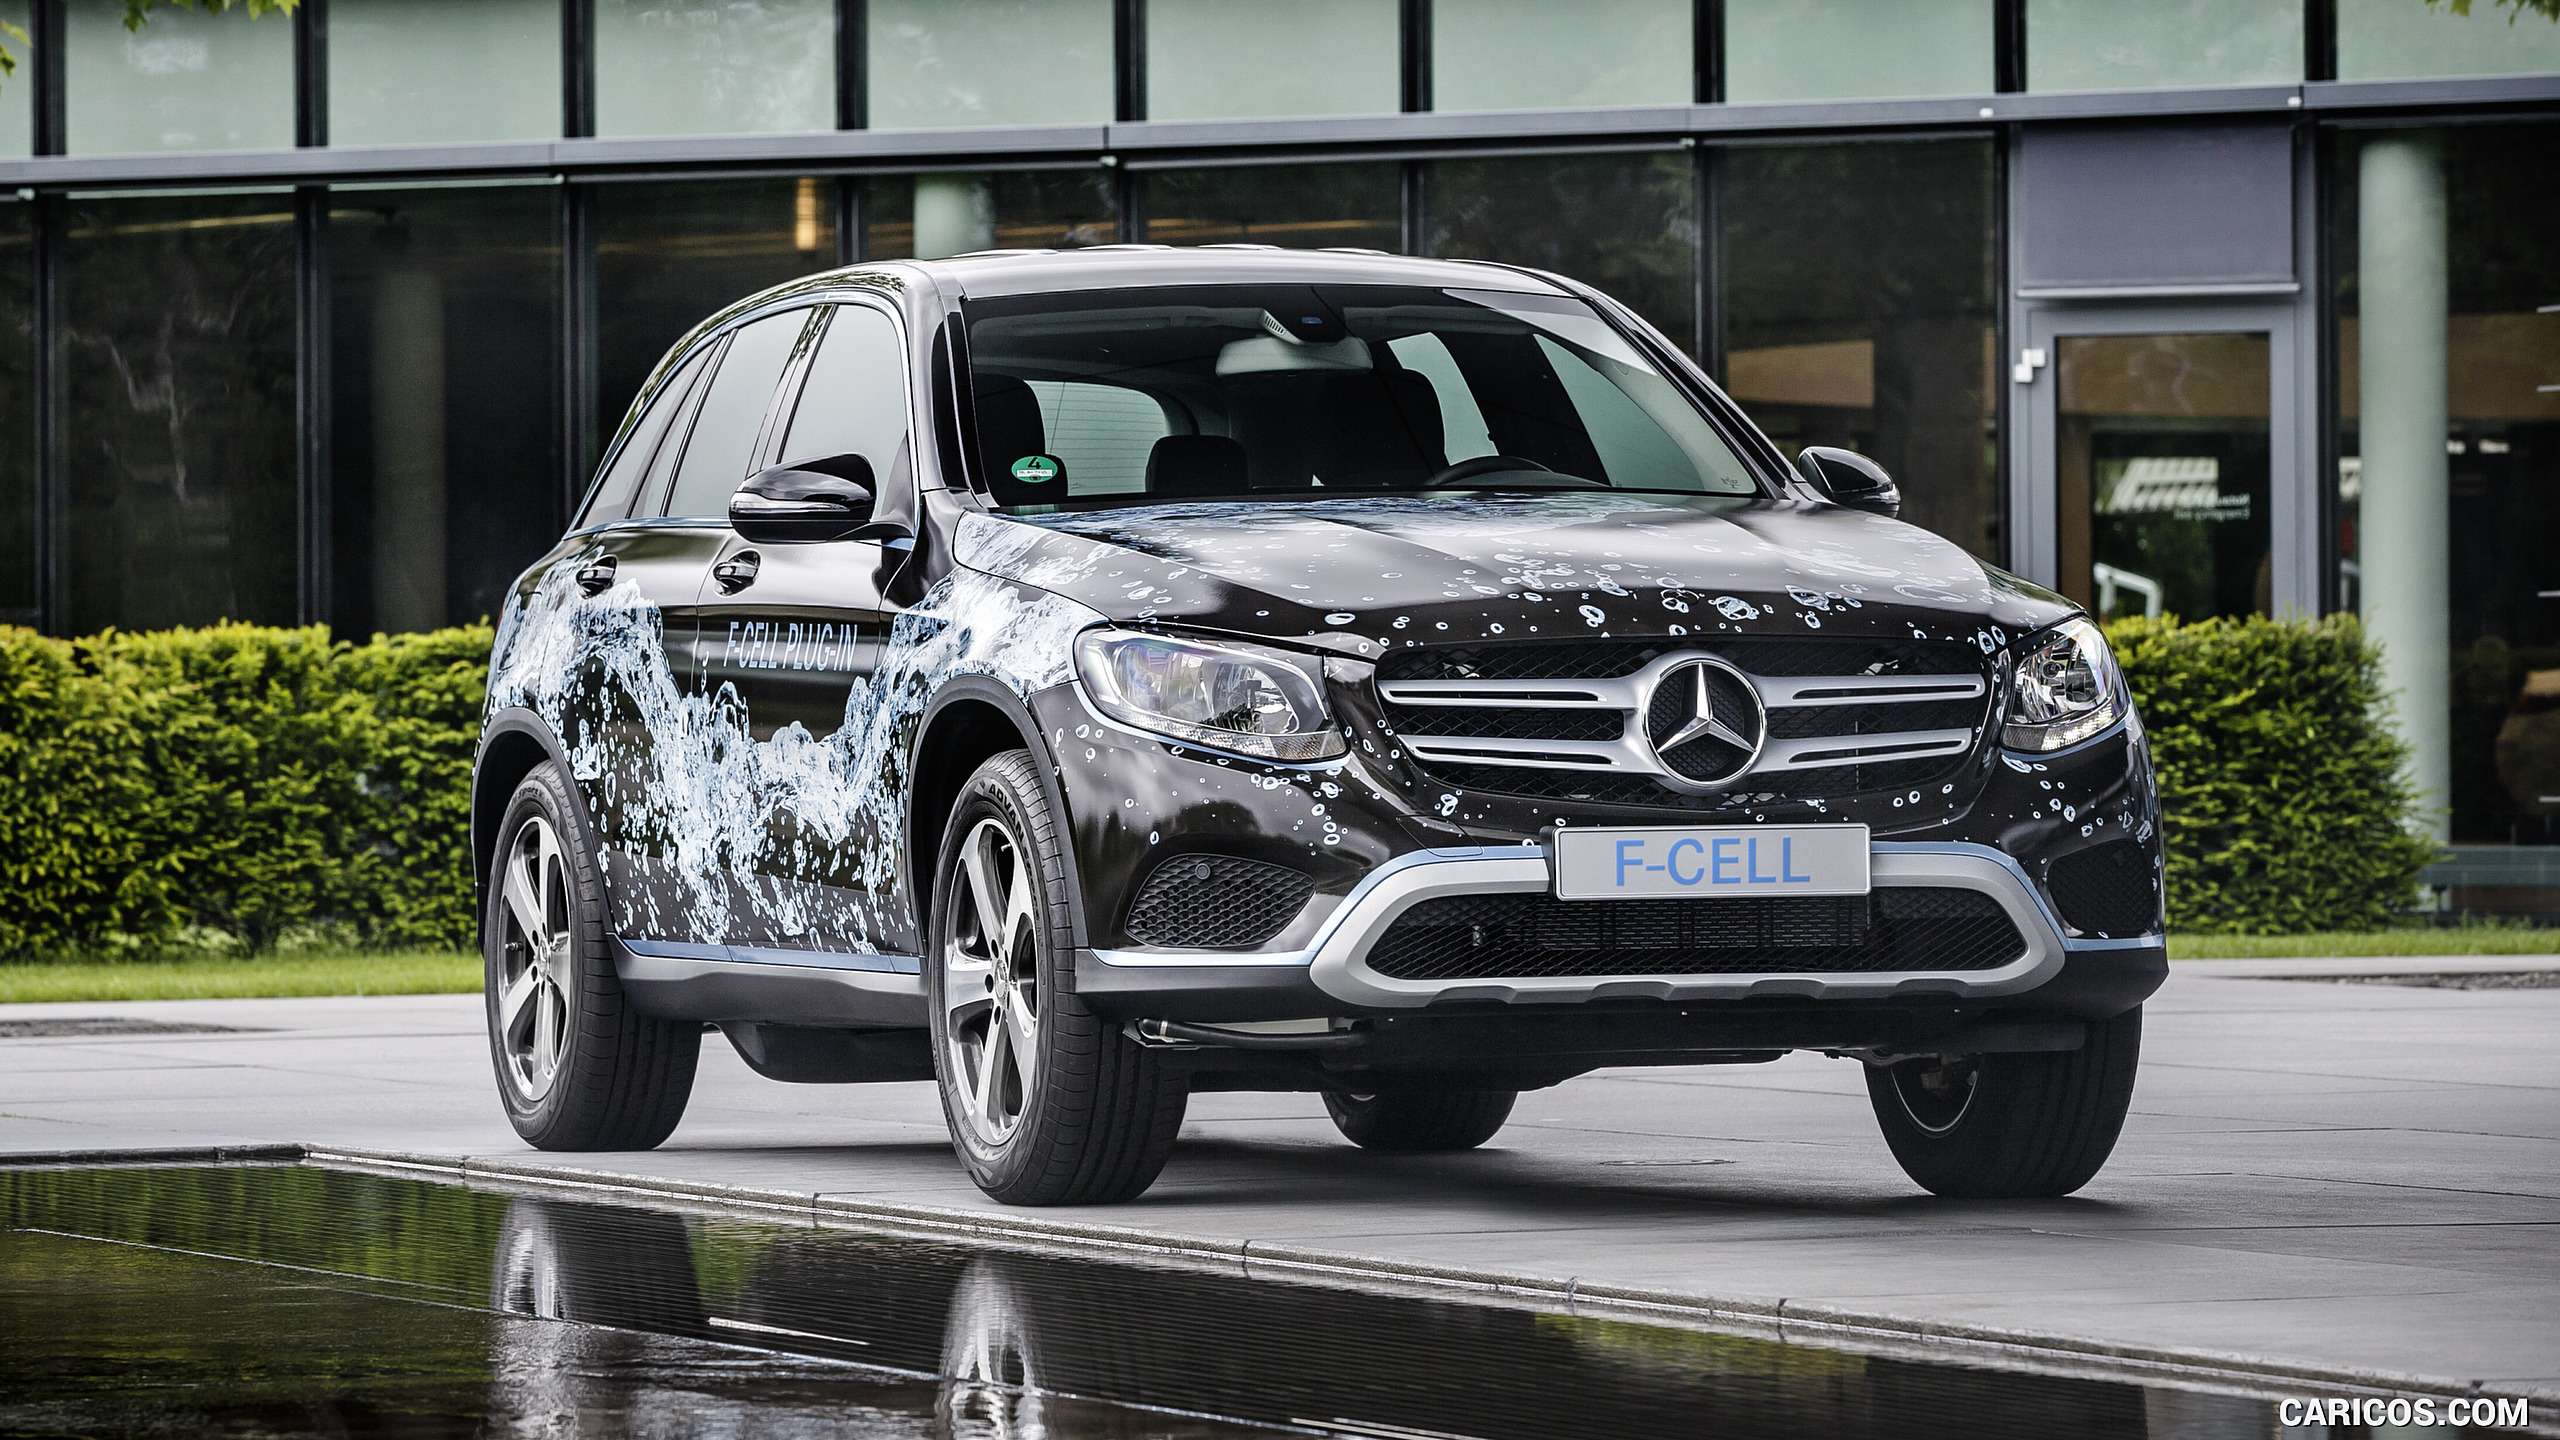 2016 Mercedes-Benz GLC F-Cell Plug-In Concept - Front, #1 of 20